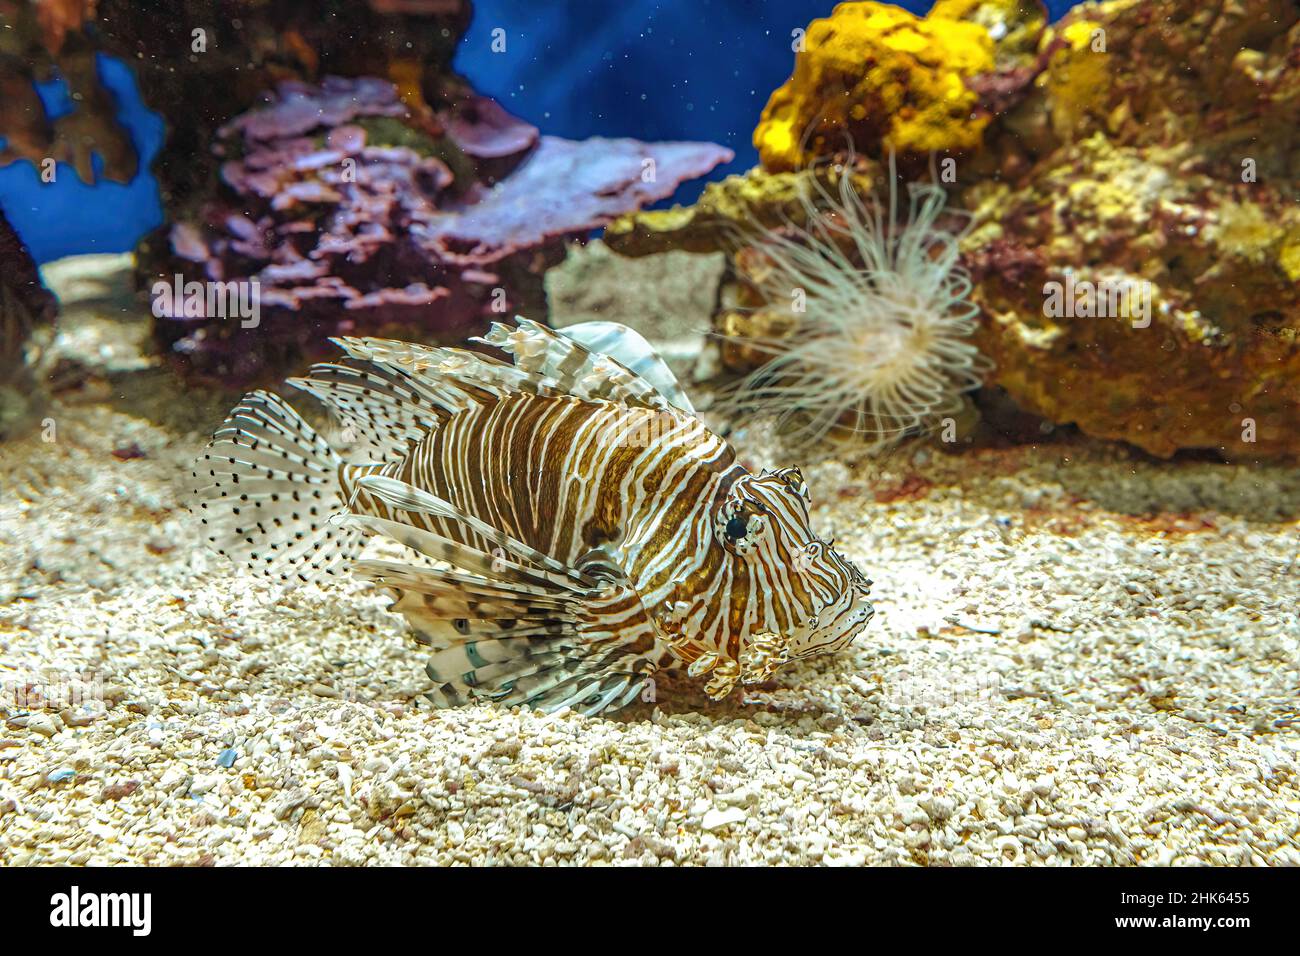 close up of a Lionfish of aquarium with venomous fins in coral depth. venomous predator fish of Pterois miles species, native to the Indo-Pacific and Stock Photo